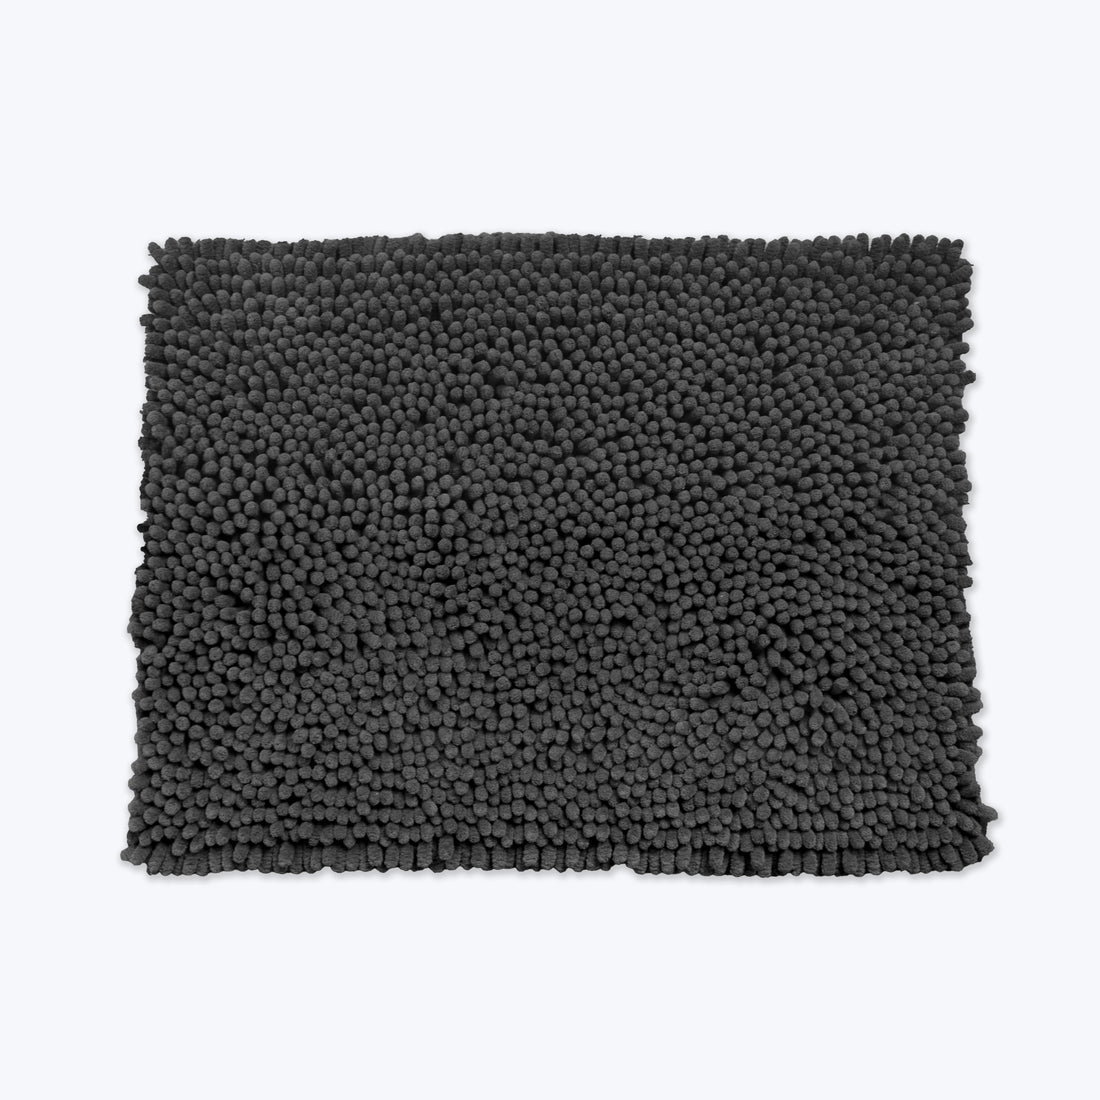 Charcoal grey chunky bobble bath mat, made from super plush chenille